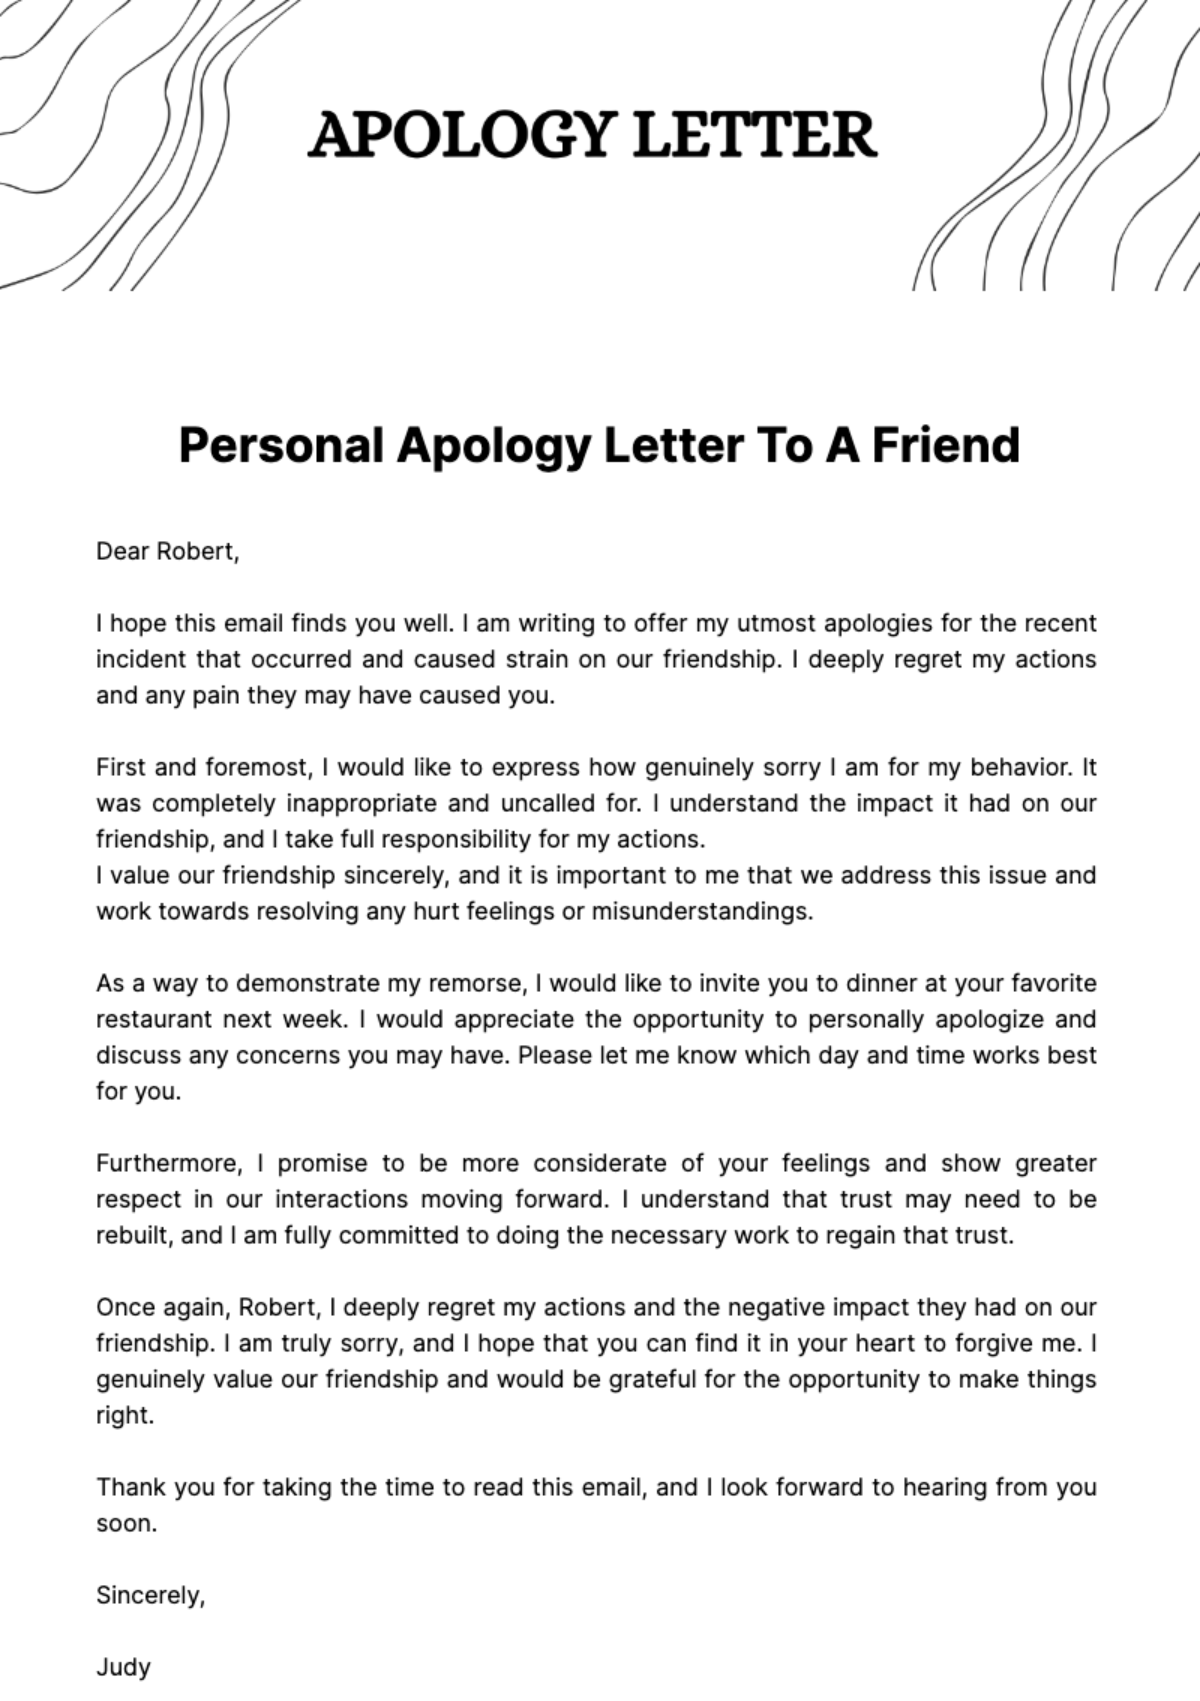 Personal Apology Letter to a Friend  Template